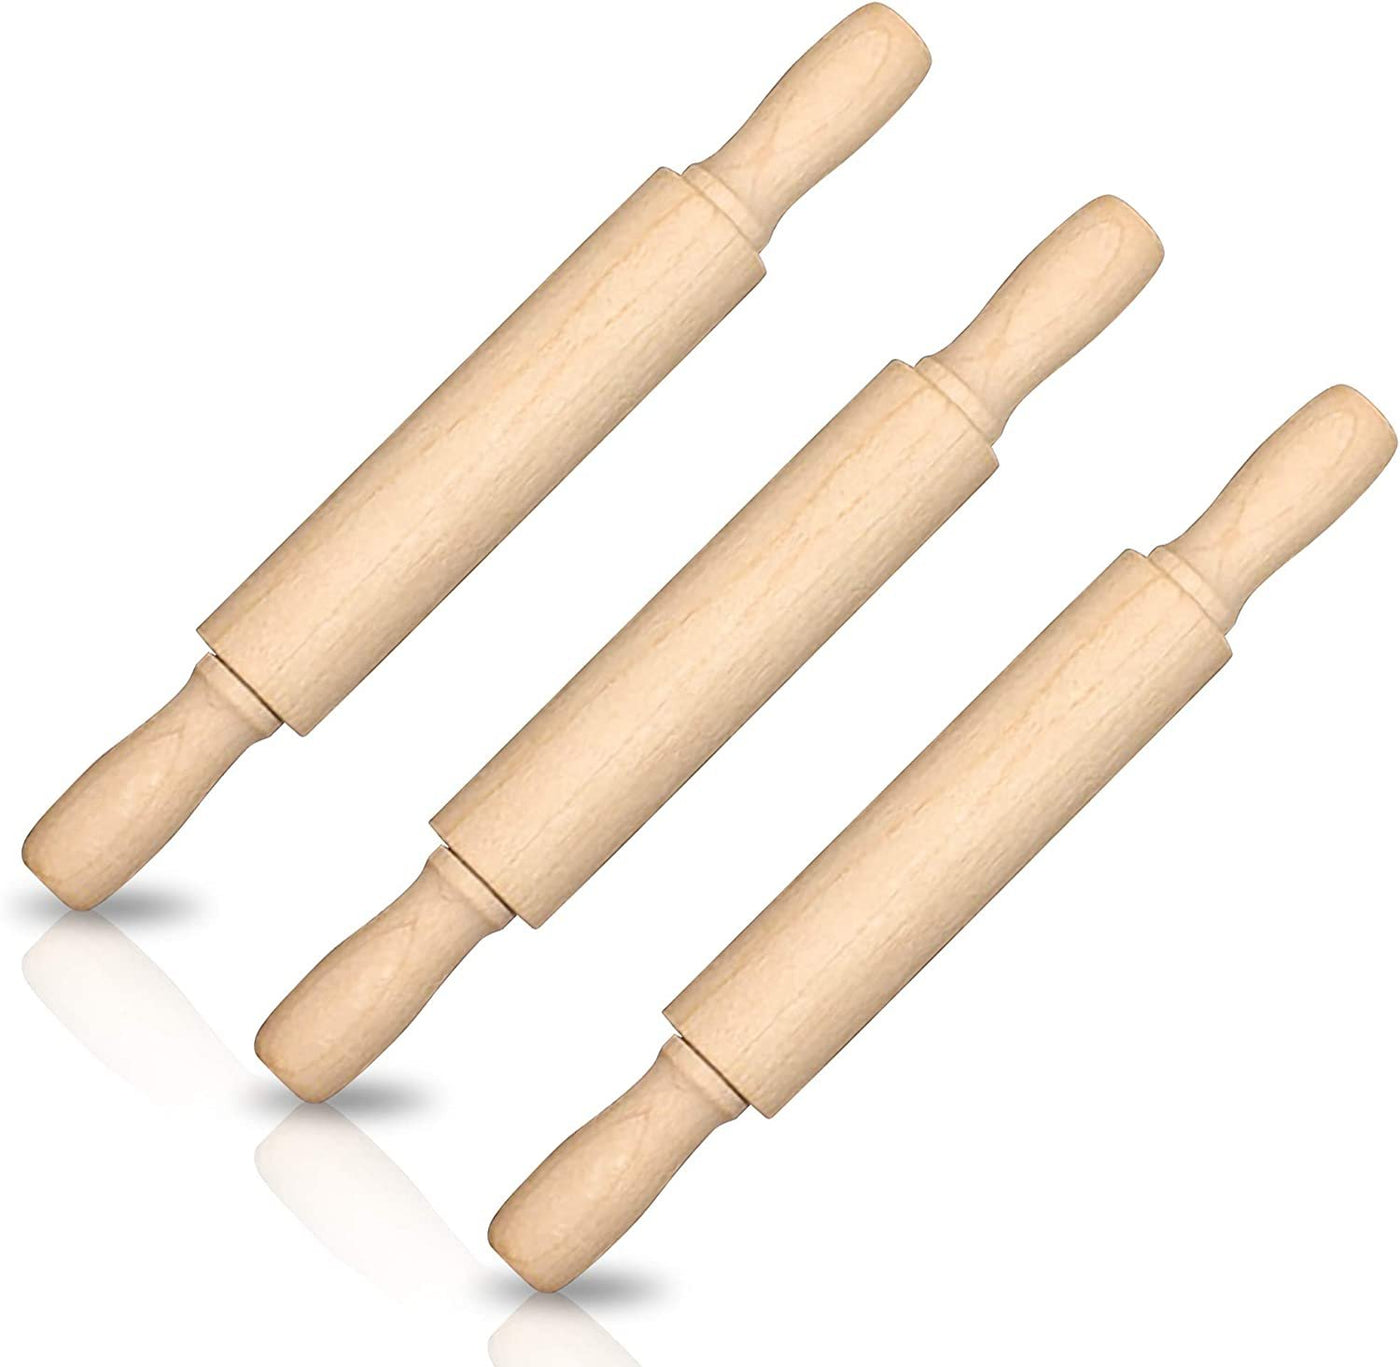 7" Mini Rolling Pins for Kids - Set of 3 - Small Wooden Rollers for Baking, Cooking, Play Doh, Clay, Cookie Dough - Arts and Crafts Toy Supplies for Boys and Girls